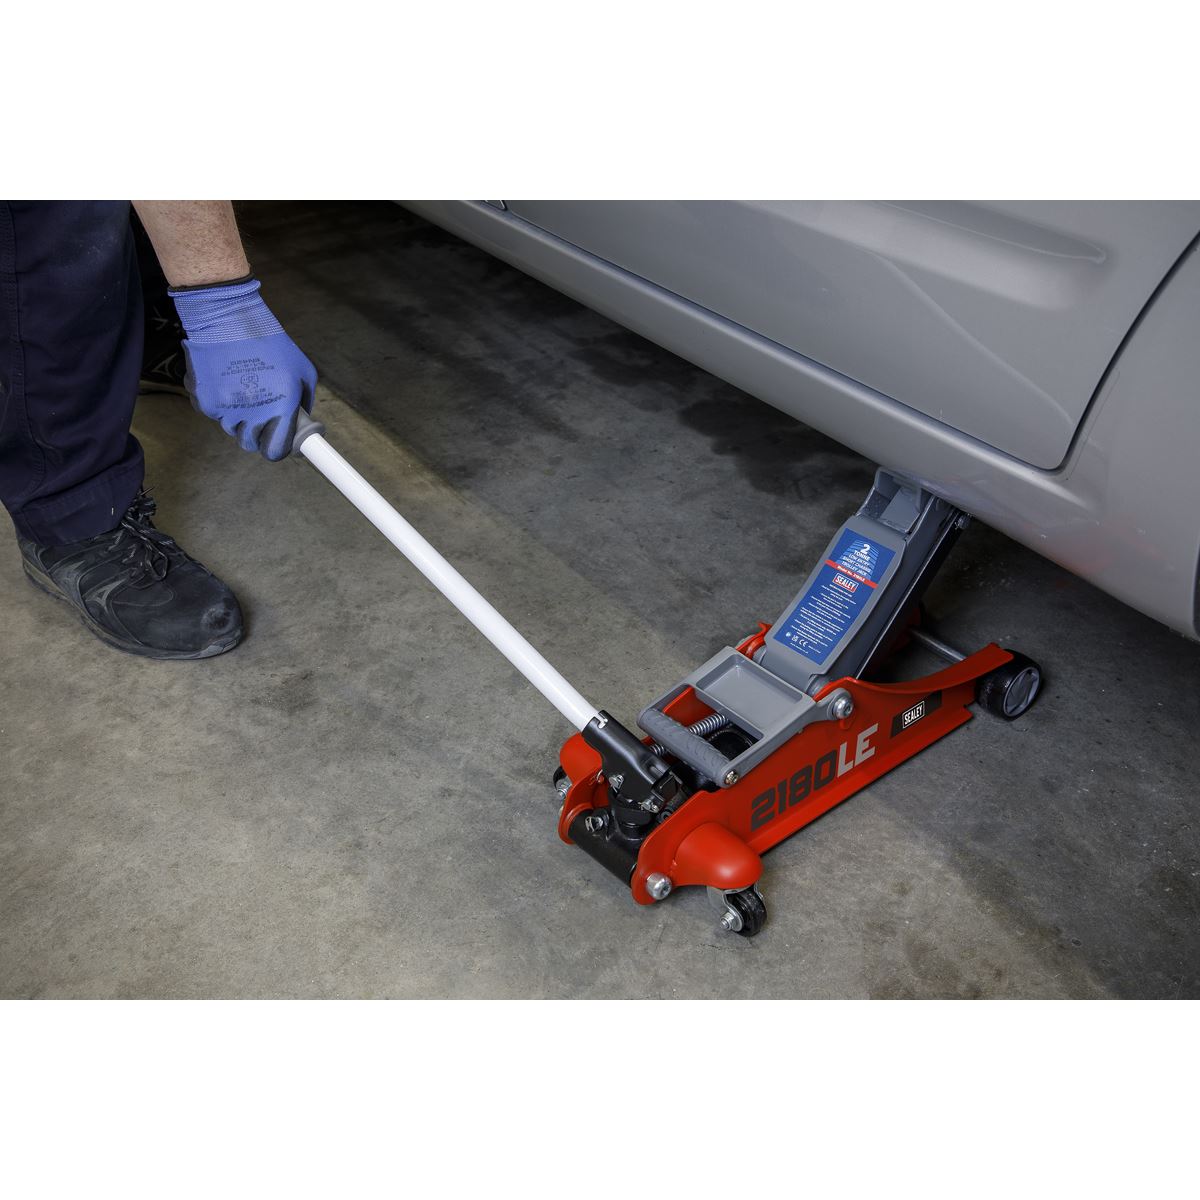 Sealey 180° Handle Trolley Jack 2 Tonne Low Profile Short Chassis - Red